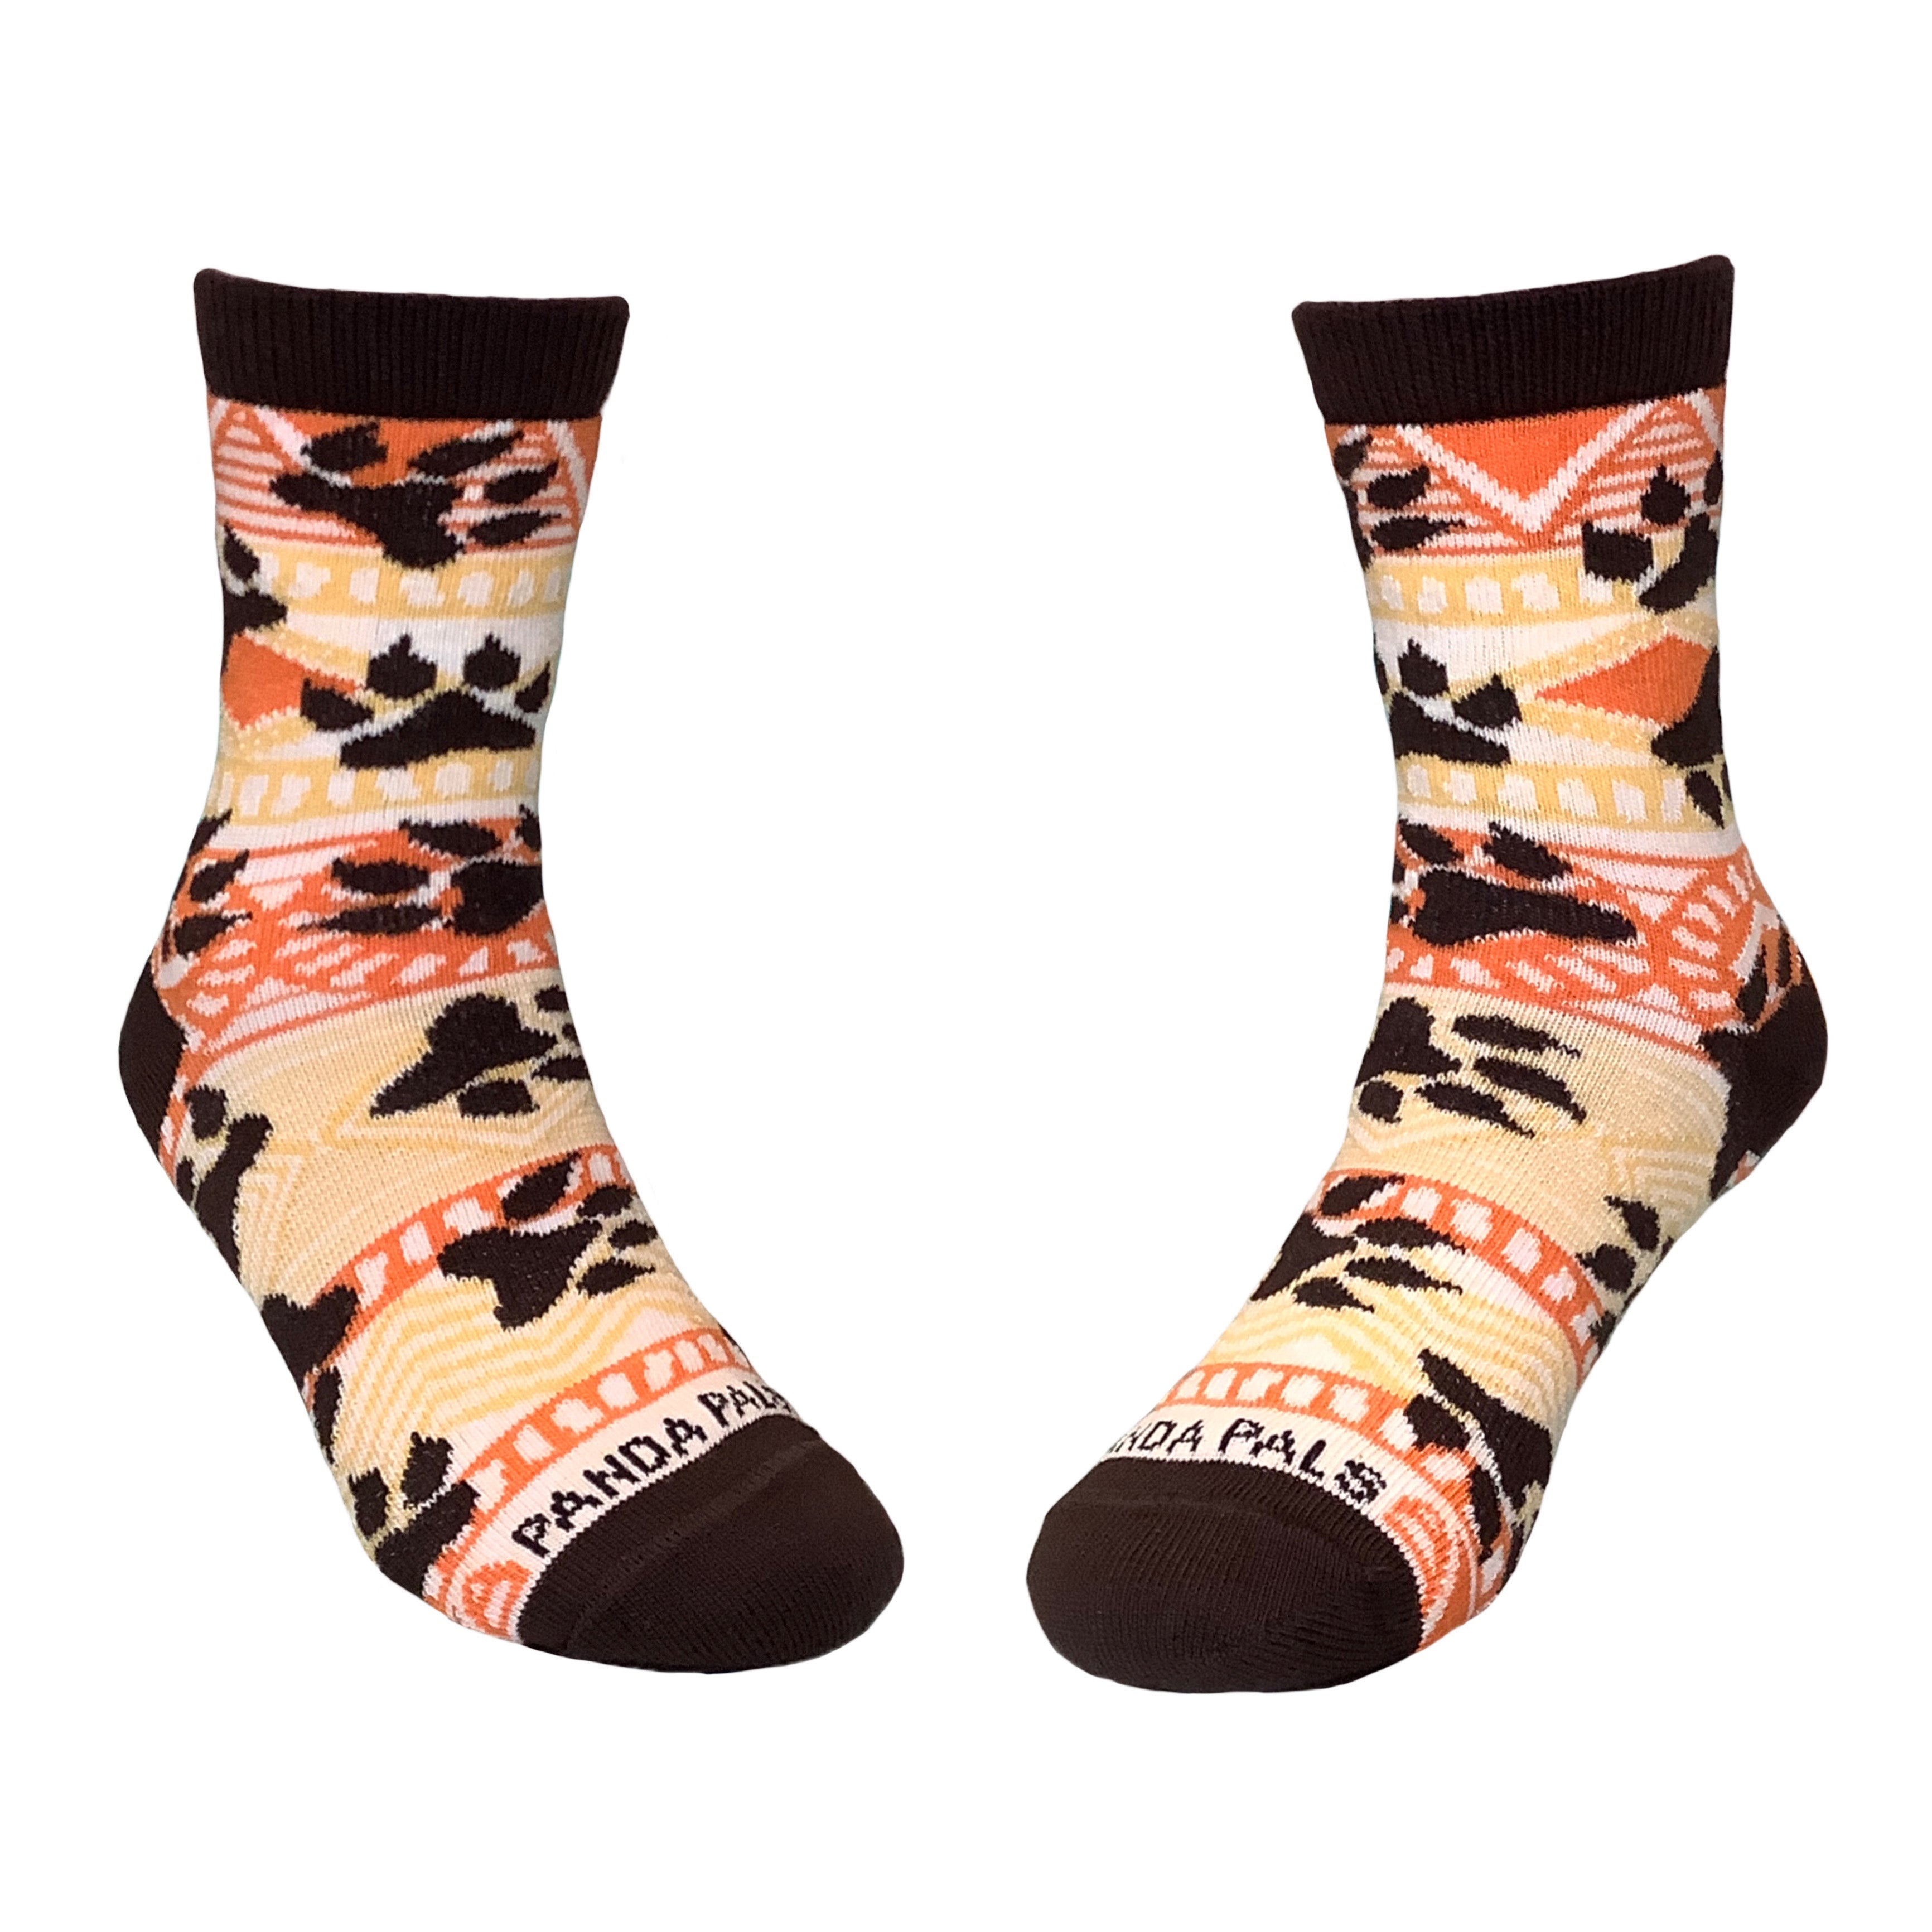 Lion Paws with Tribal Prints Sock (Ages 3-7) from the Sock Panda